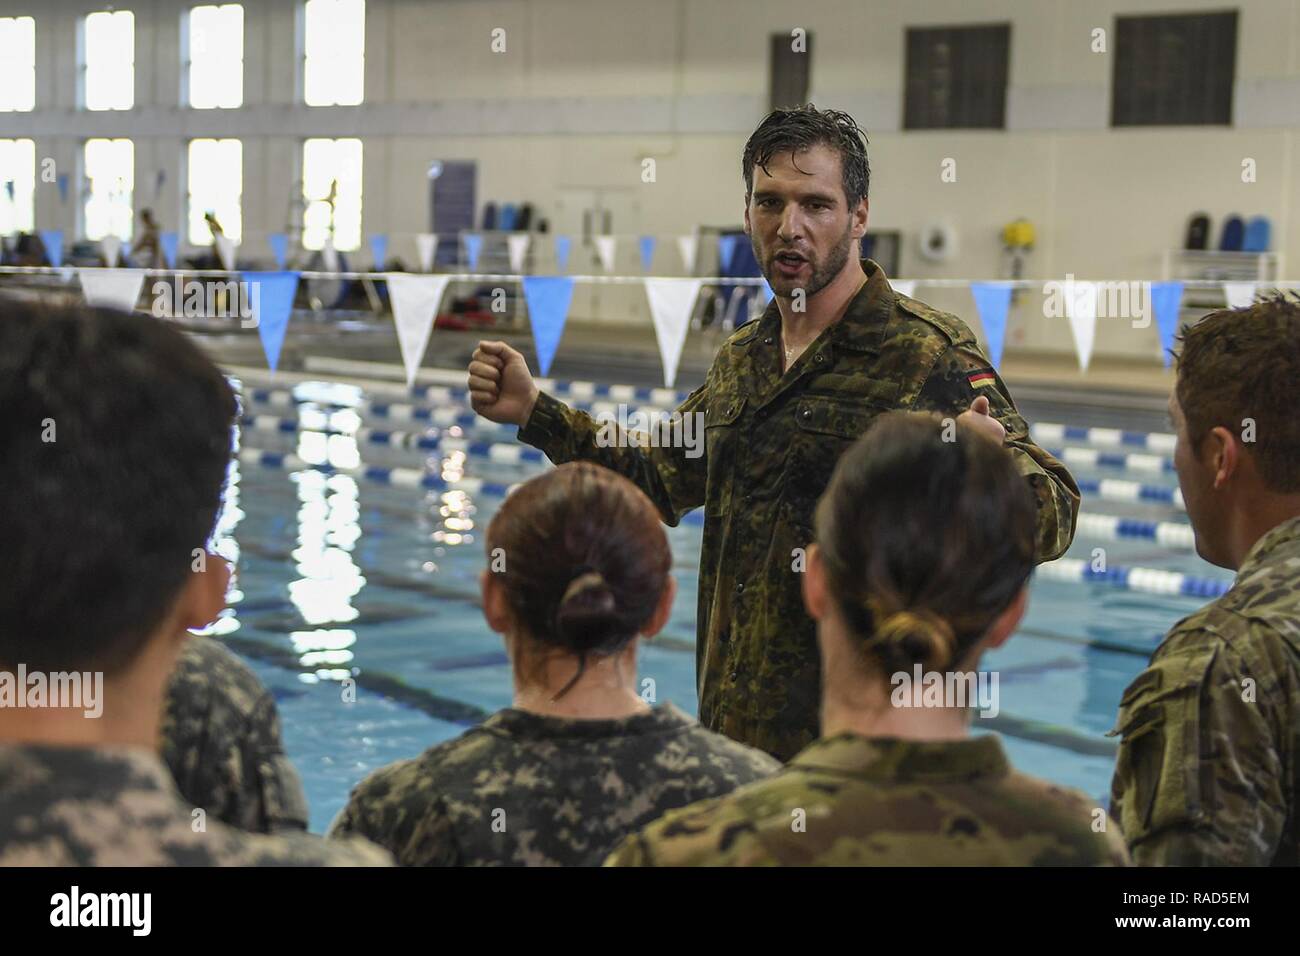 JACKSONVILLE, Fla. (Jan. 26, 2017) Sergeant Major (Oberstabsfeldwebel in German) Carsten Dreblow, a German Army liaison stationed in Fort Benning, Ga., speaks to U.S. Army soldiers while administering the German Armed Forces Proficiency Badge (GAFPB) fitness test.  The GAFPB is a decoration of Bundeswehr, the Armed Forces of the Federal Republic of Germany, and can be awarded to all German and allied service members of any rank. Stock Photo